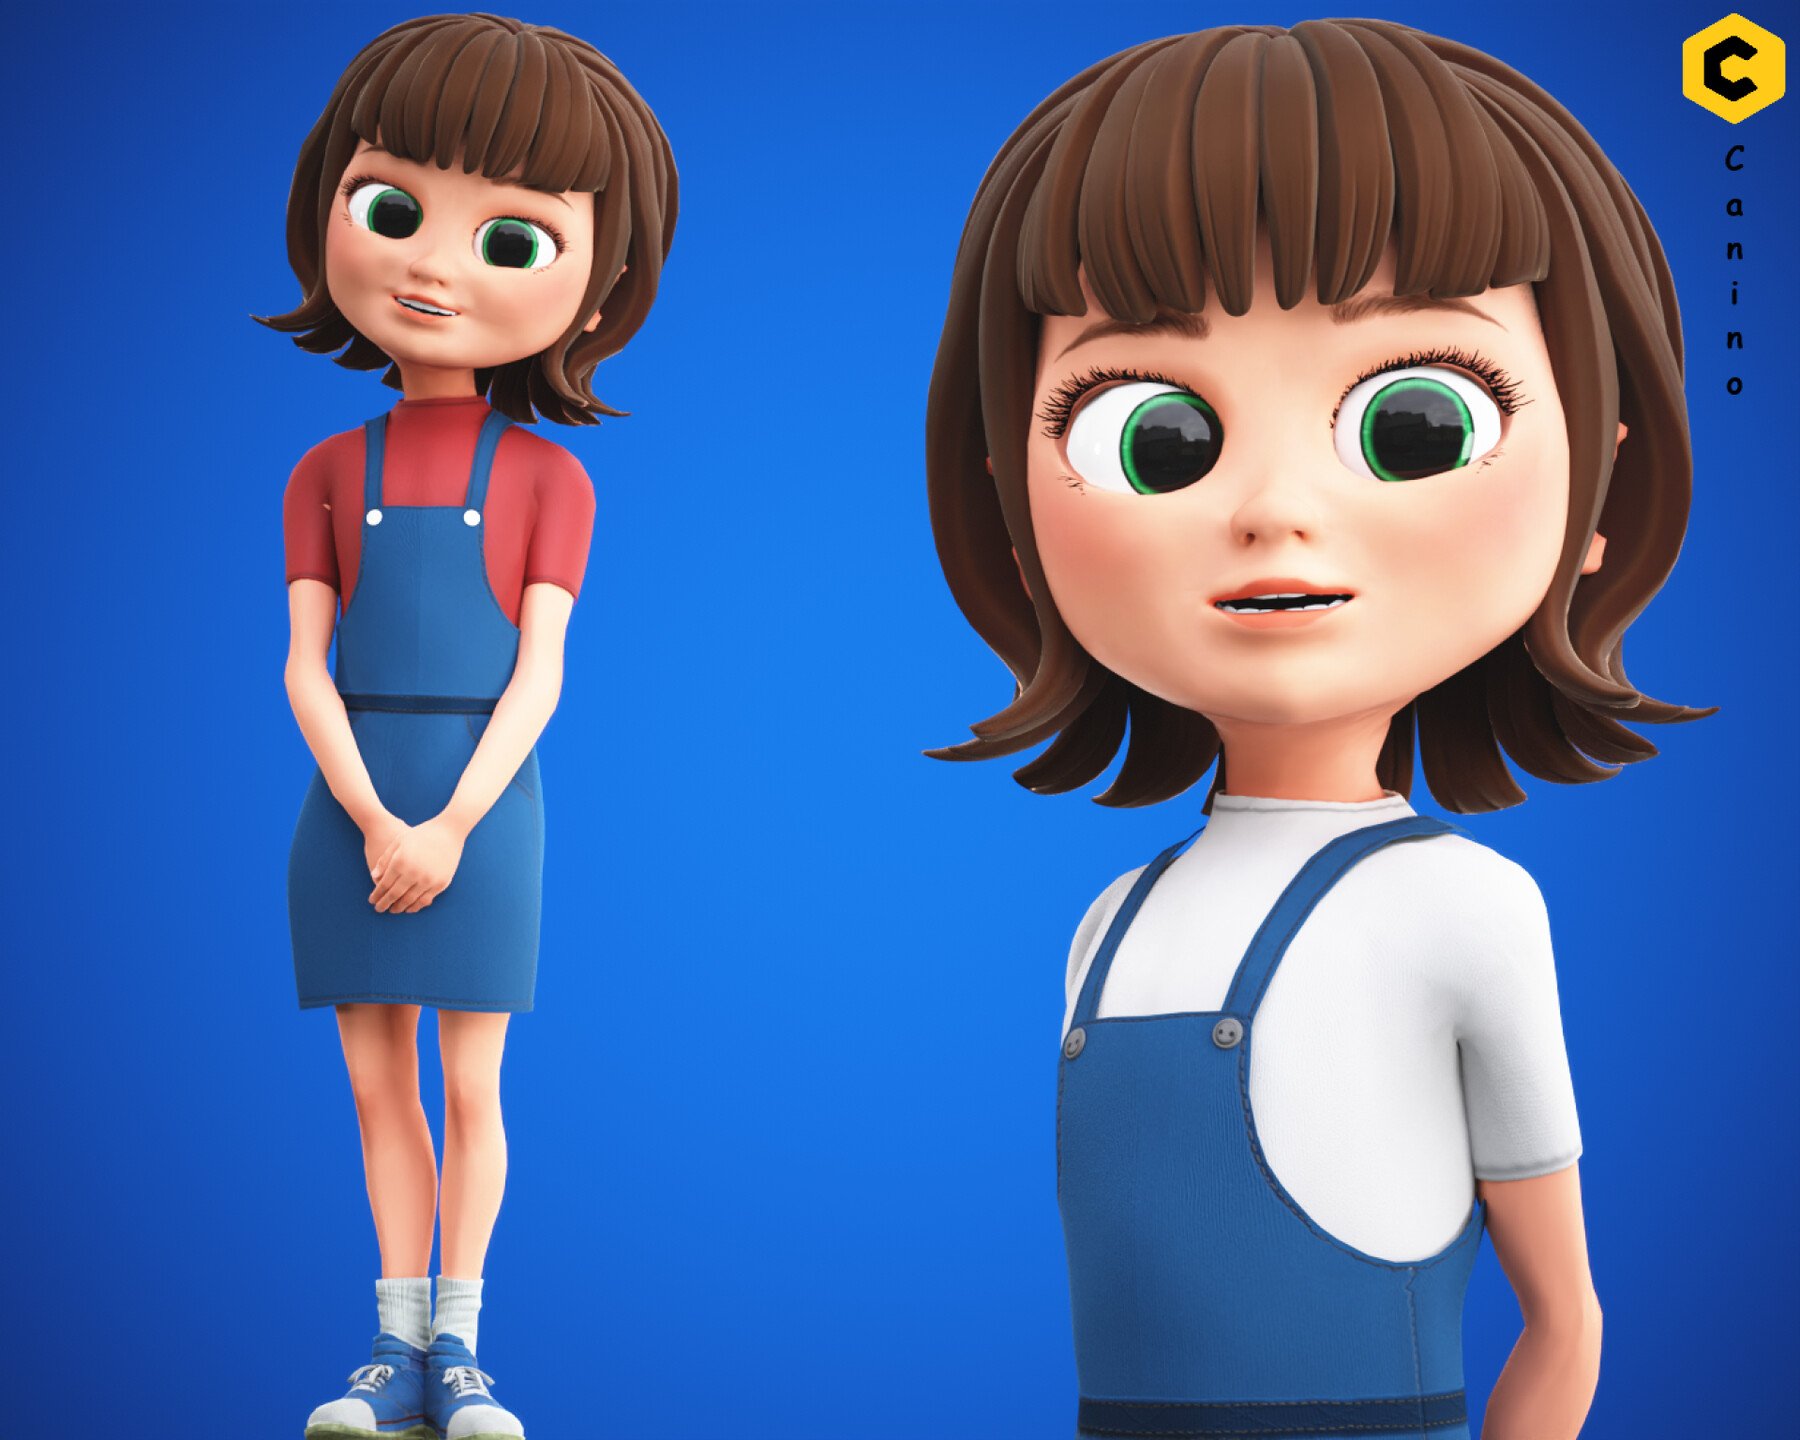 ArtStation - Stylized Cartoon Girl Character Rigged | Resources